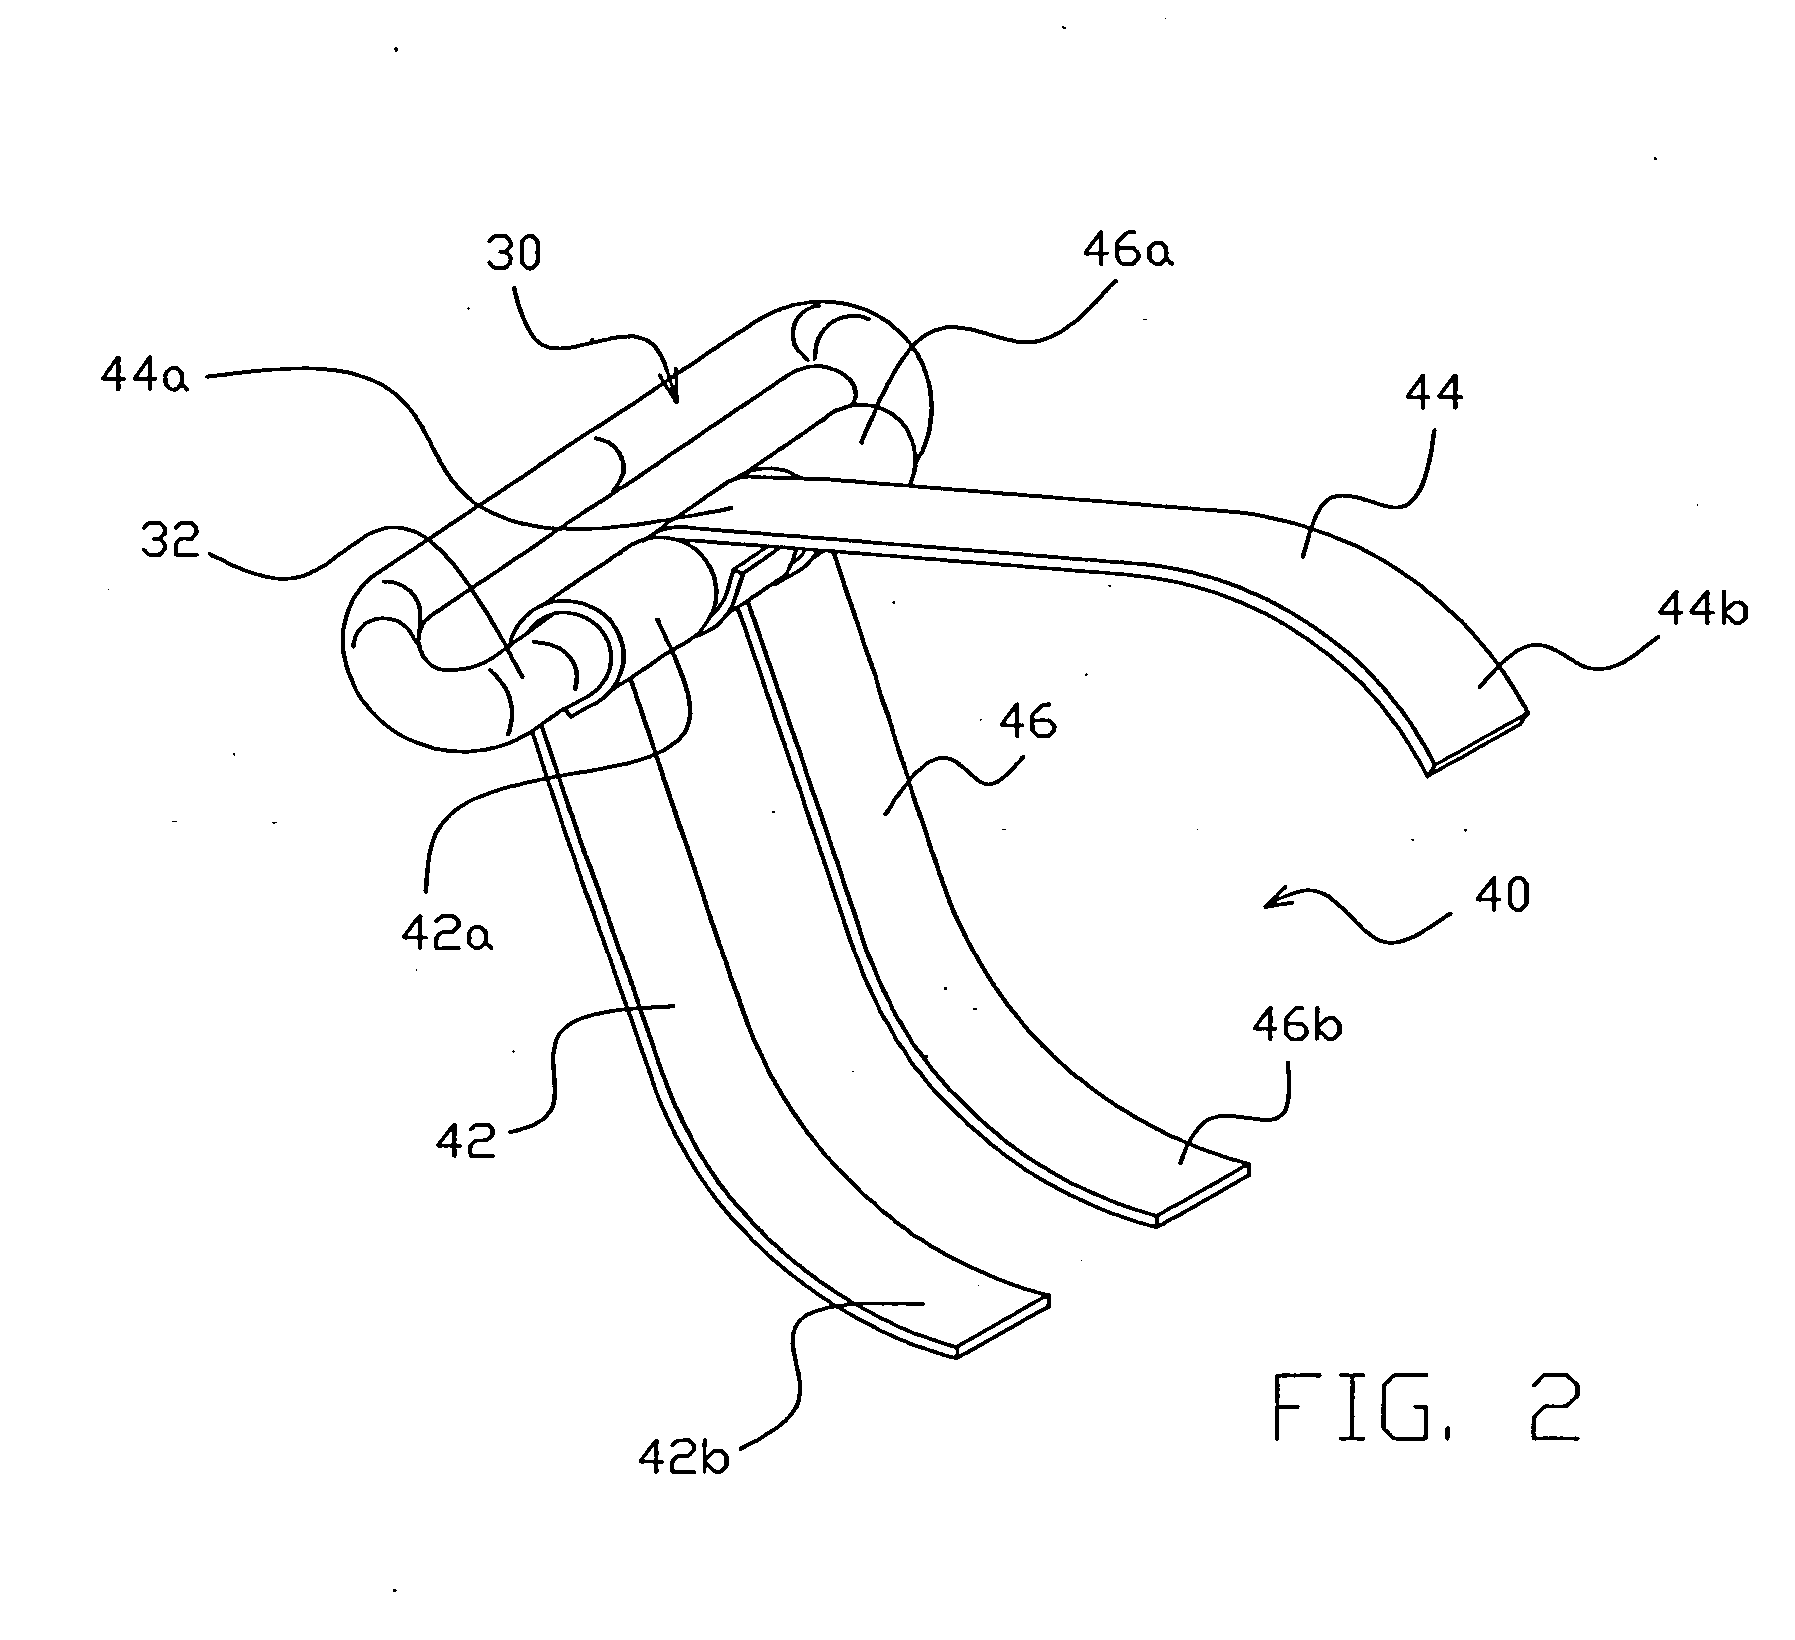 Weight-lifting device and method of use therefor